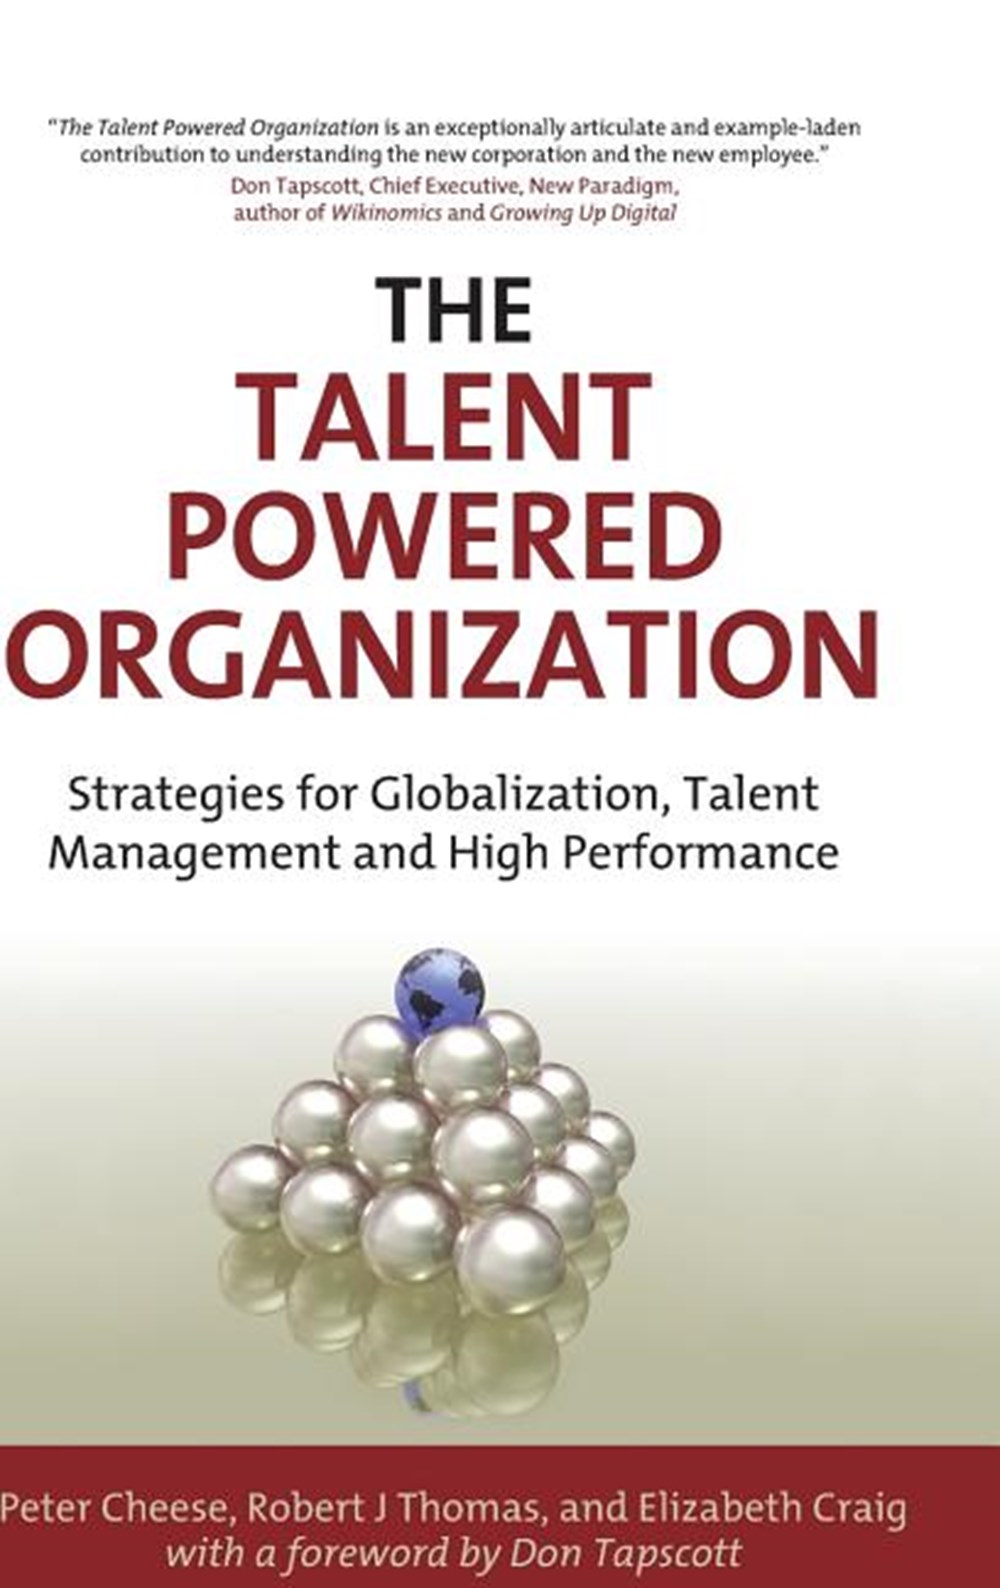 Talent Powered Organization: Strategies for Globalization, Talent Management and High Performance